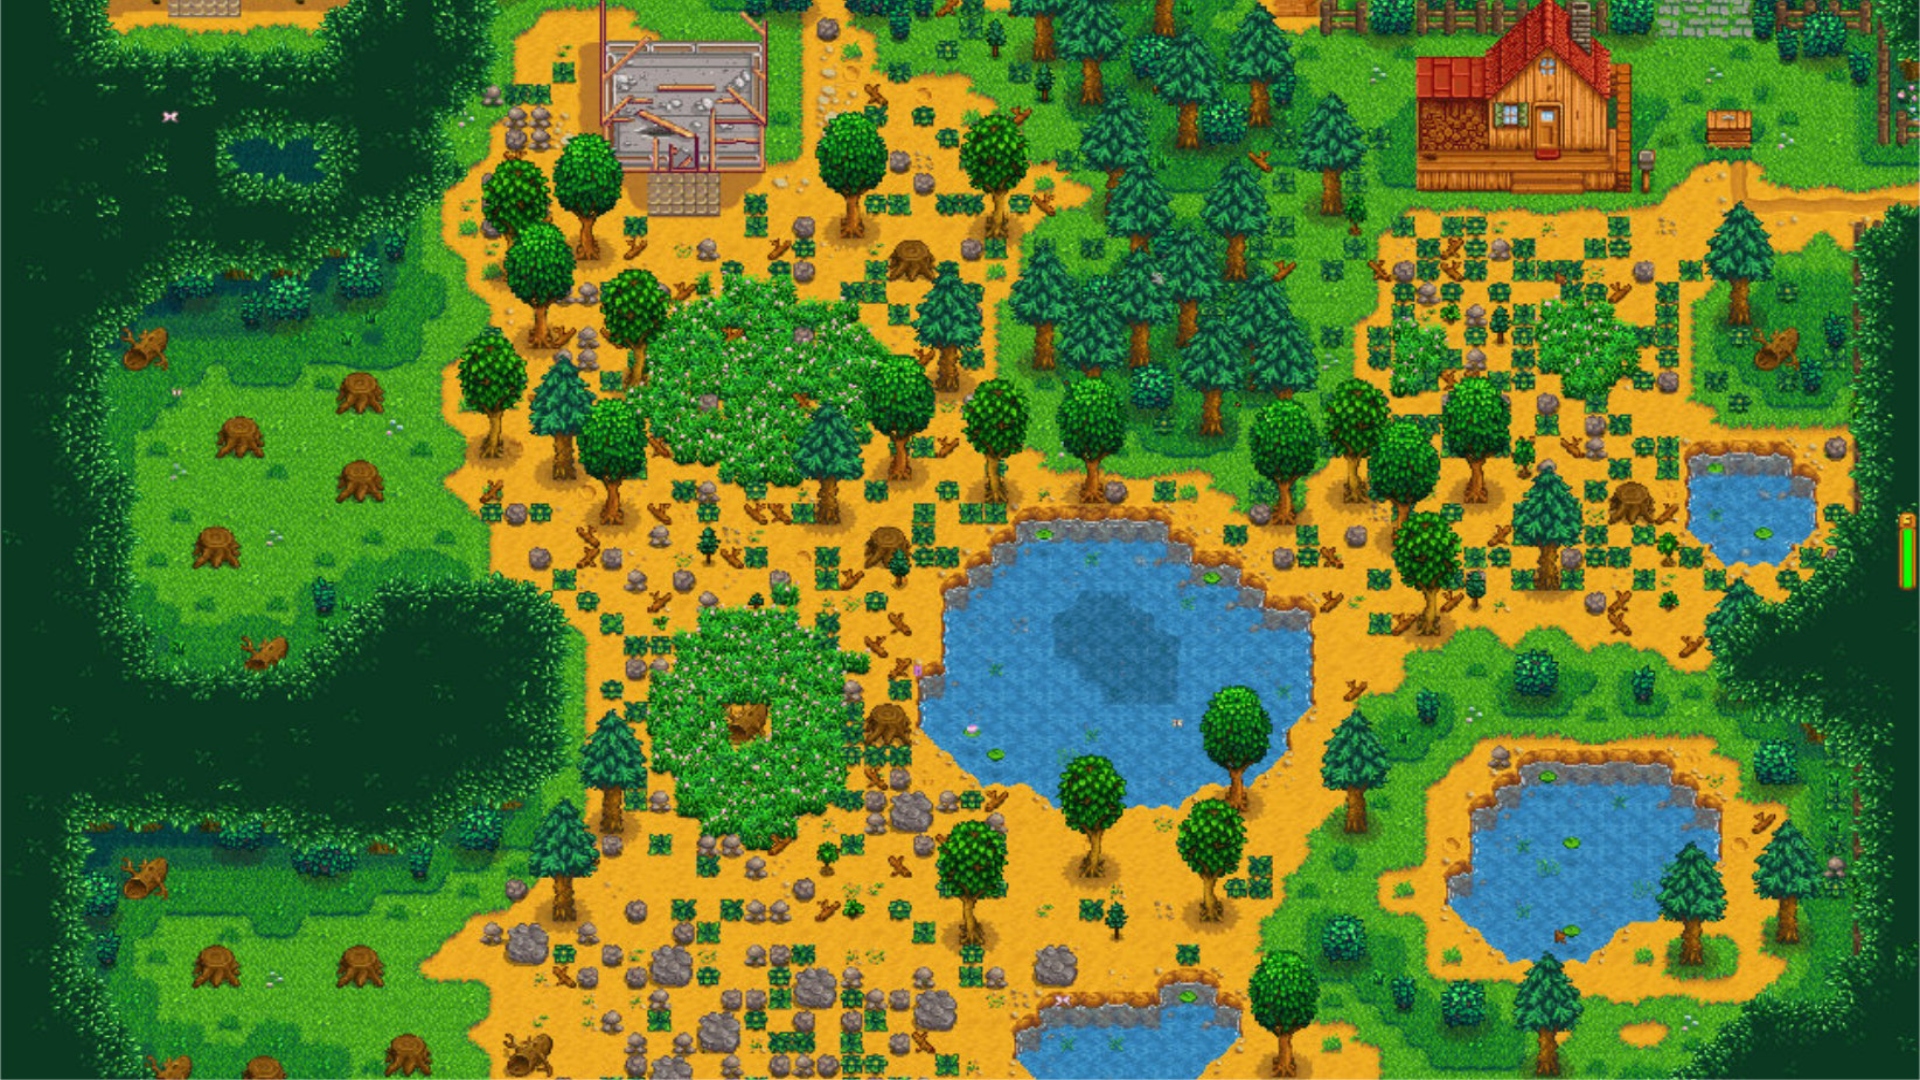 A view of Stardew Valley's forest map